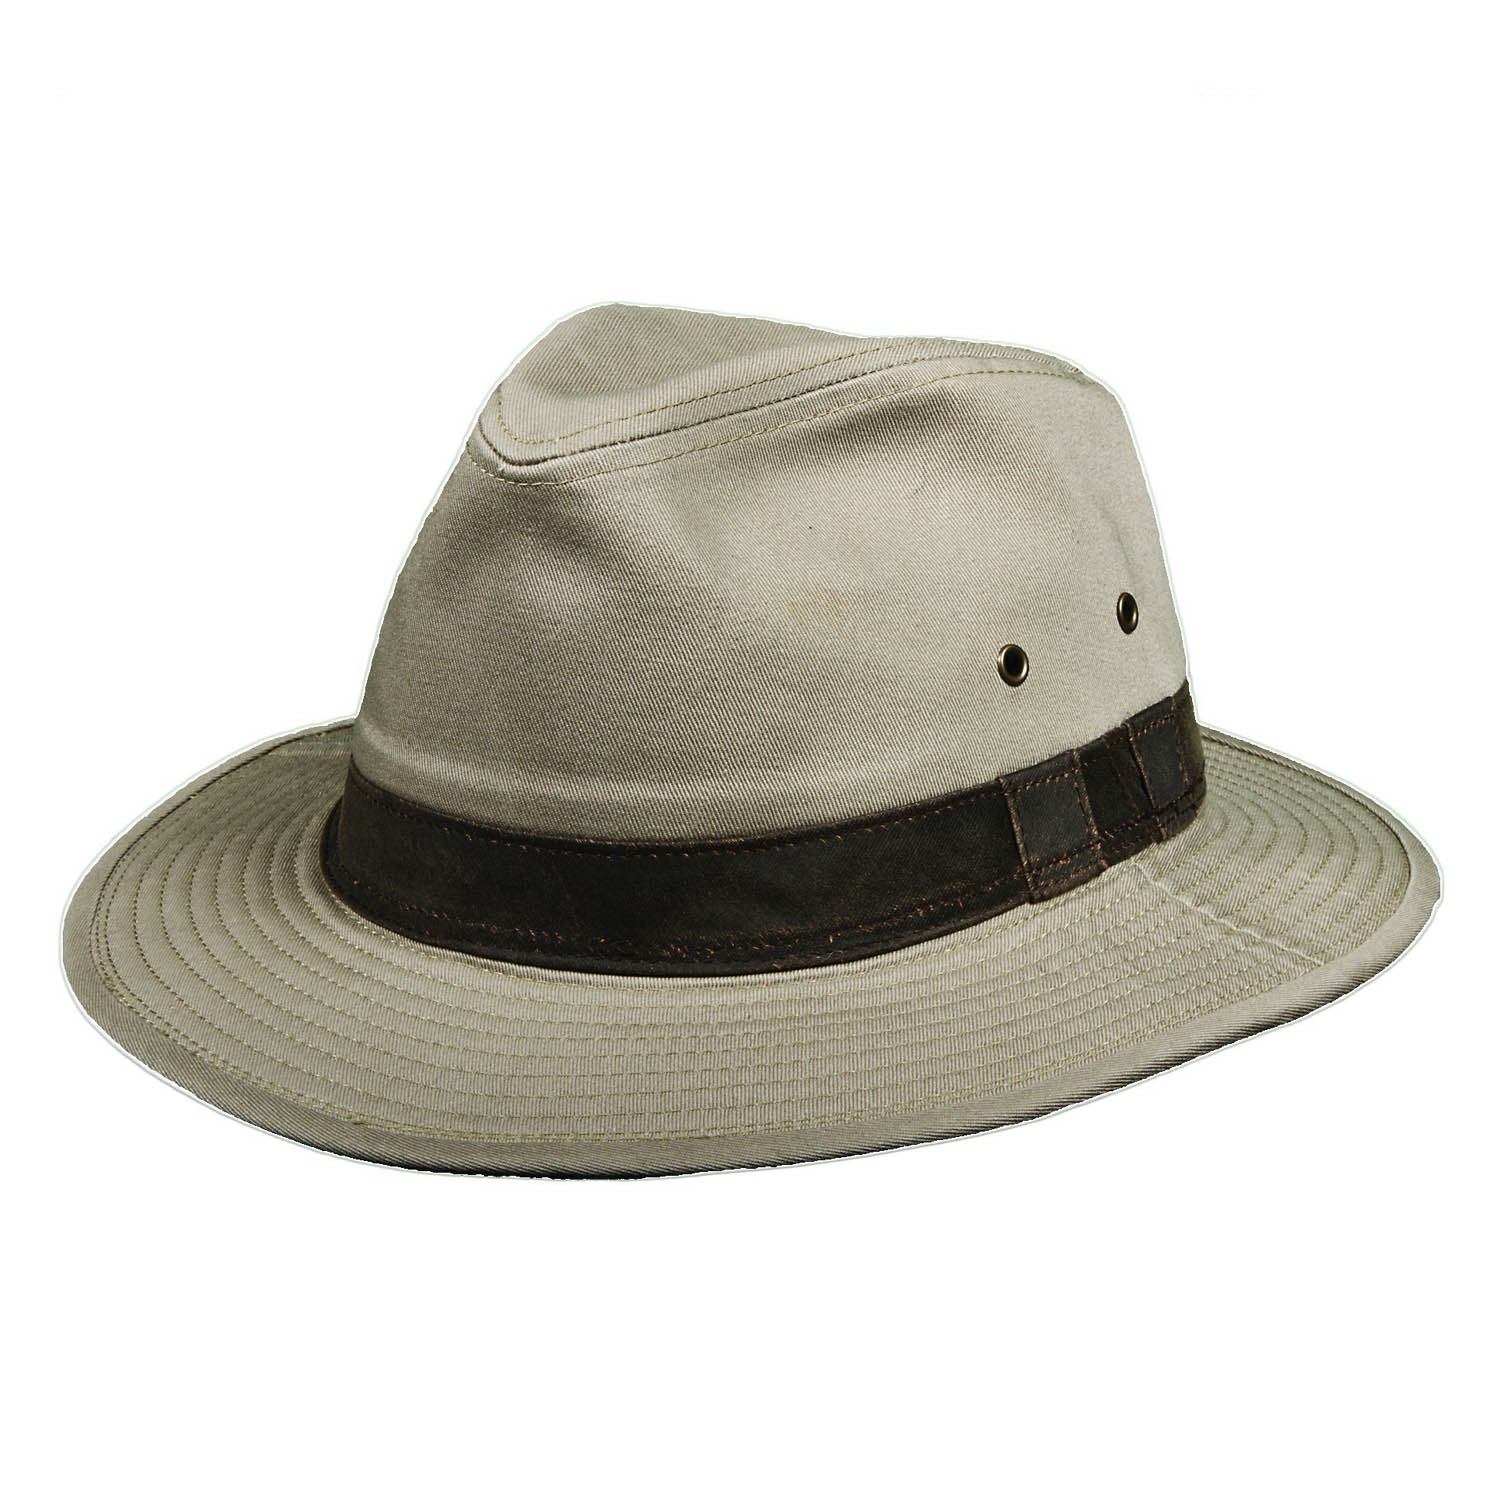 Ready For Adventures Unisex Safari Hat (Forest Green)